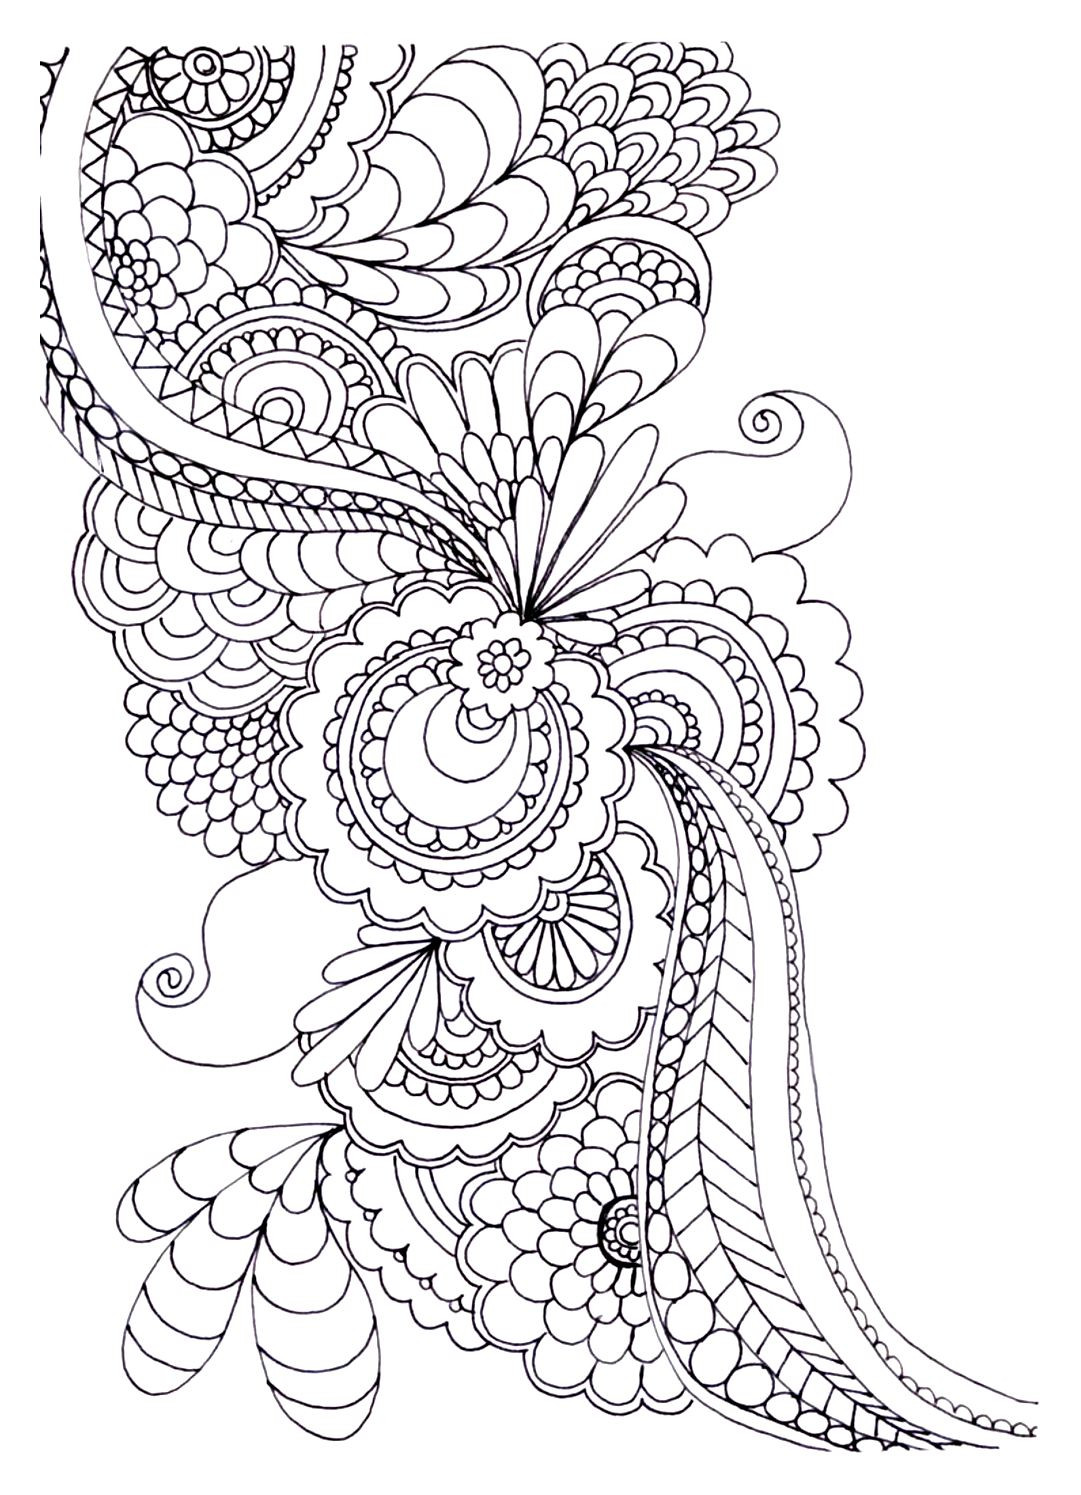 Art Coloring Book For Adults
 20 Free Adult Colouring Pages The Organised Housewife